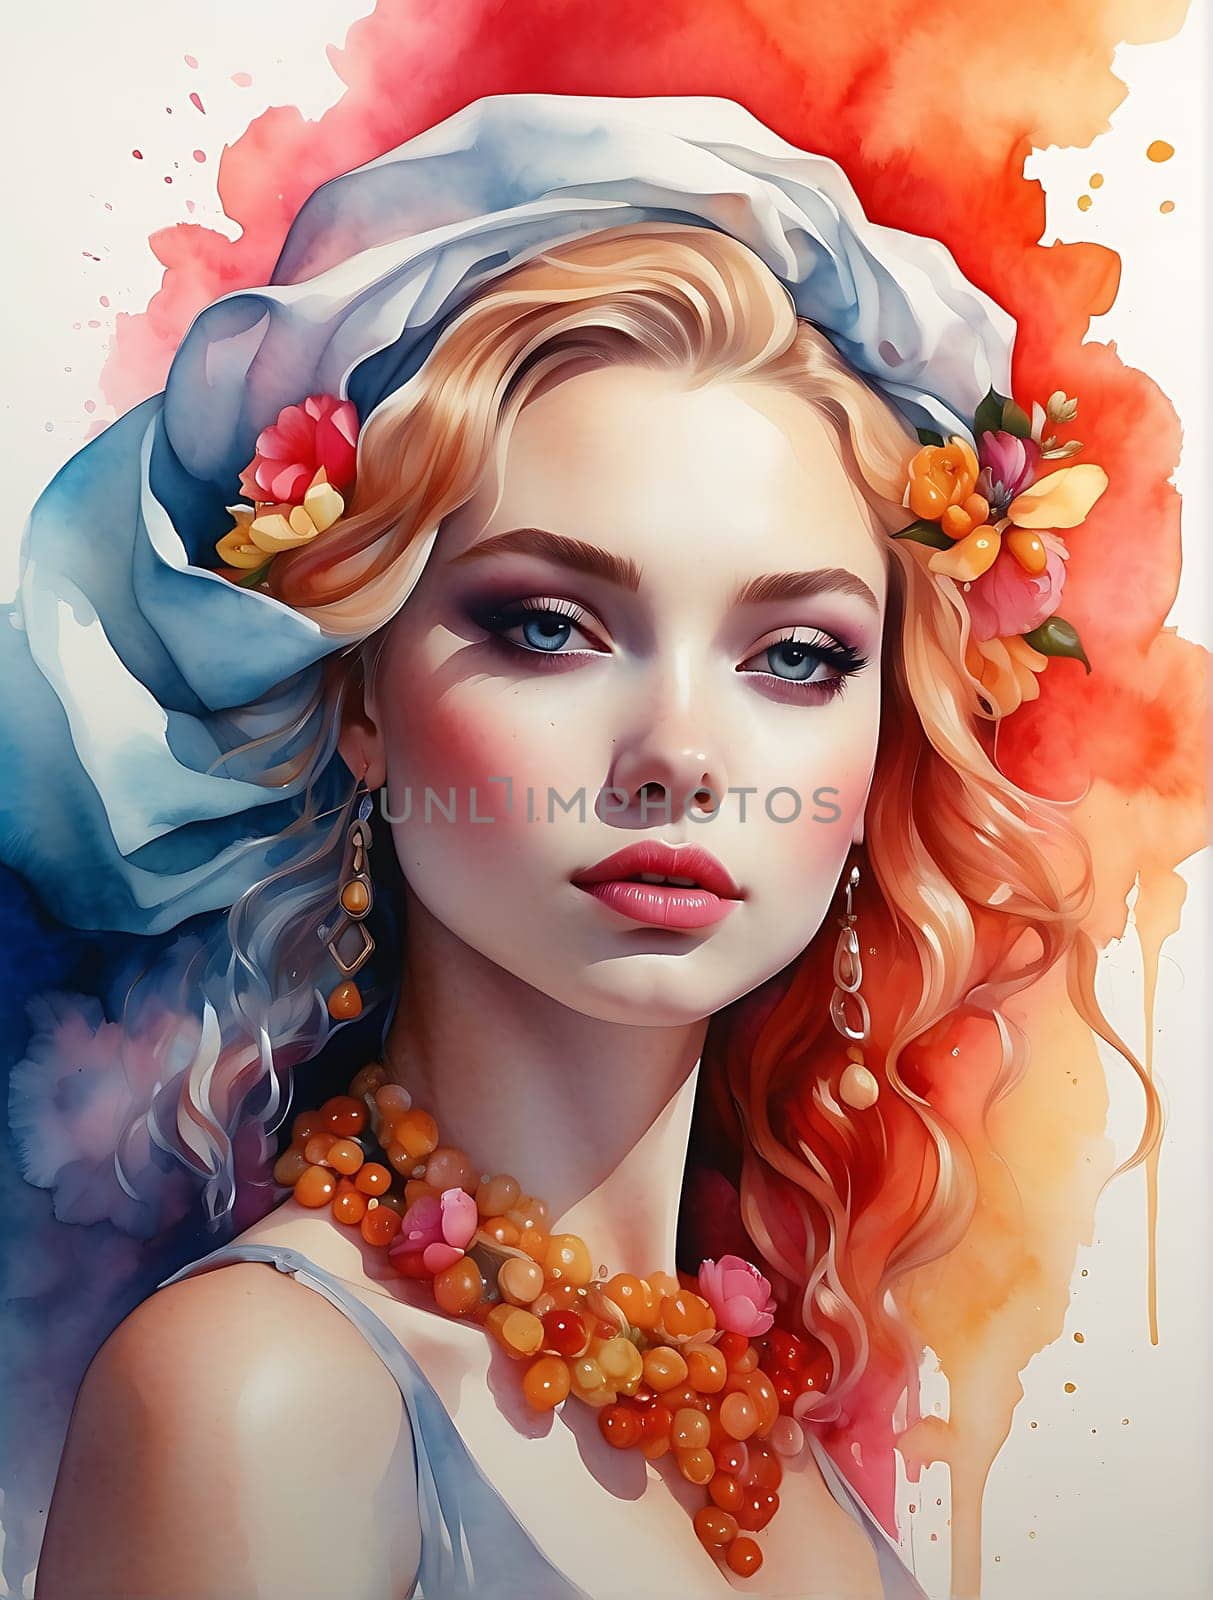 A painting of a woman wearing flowers in her hair, capturing her natural beauty and grace.